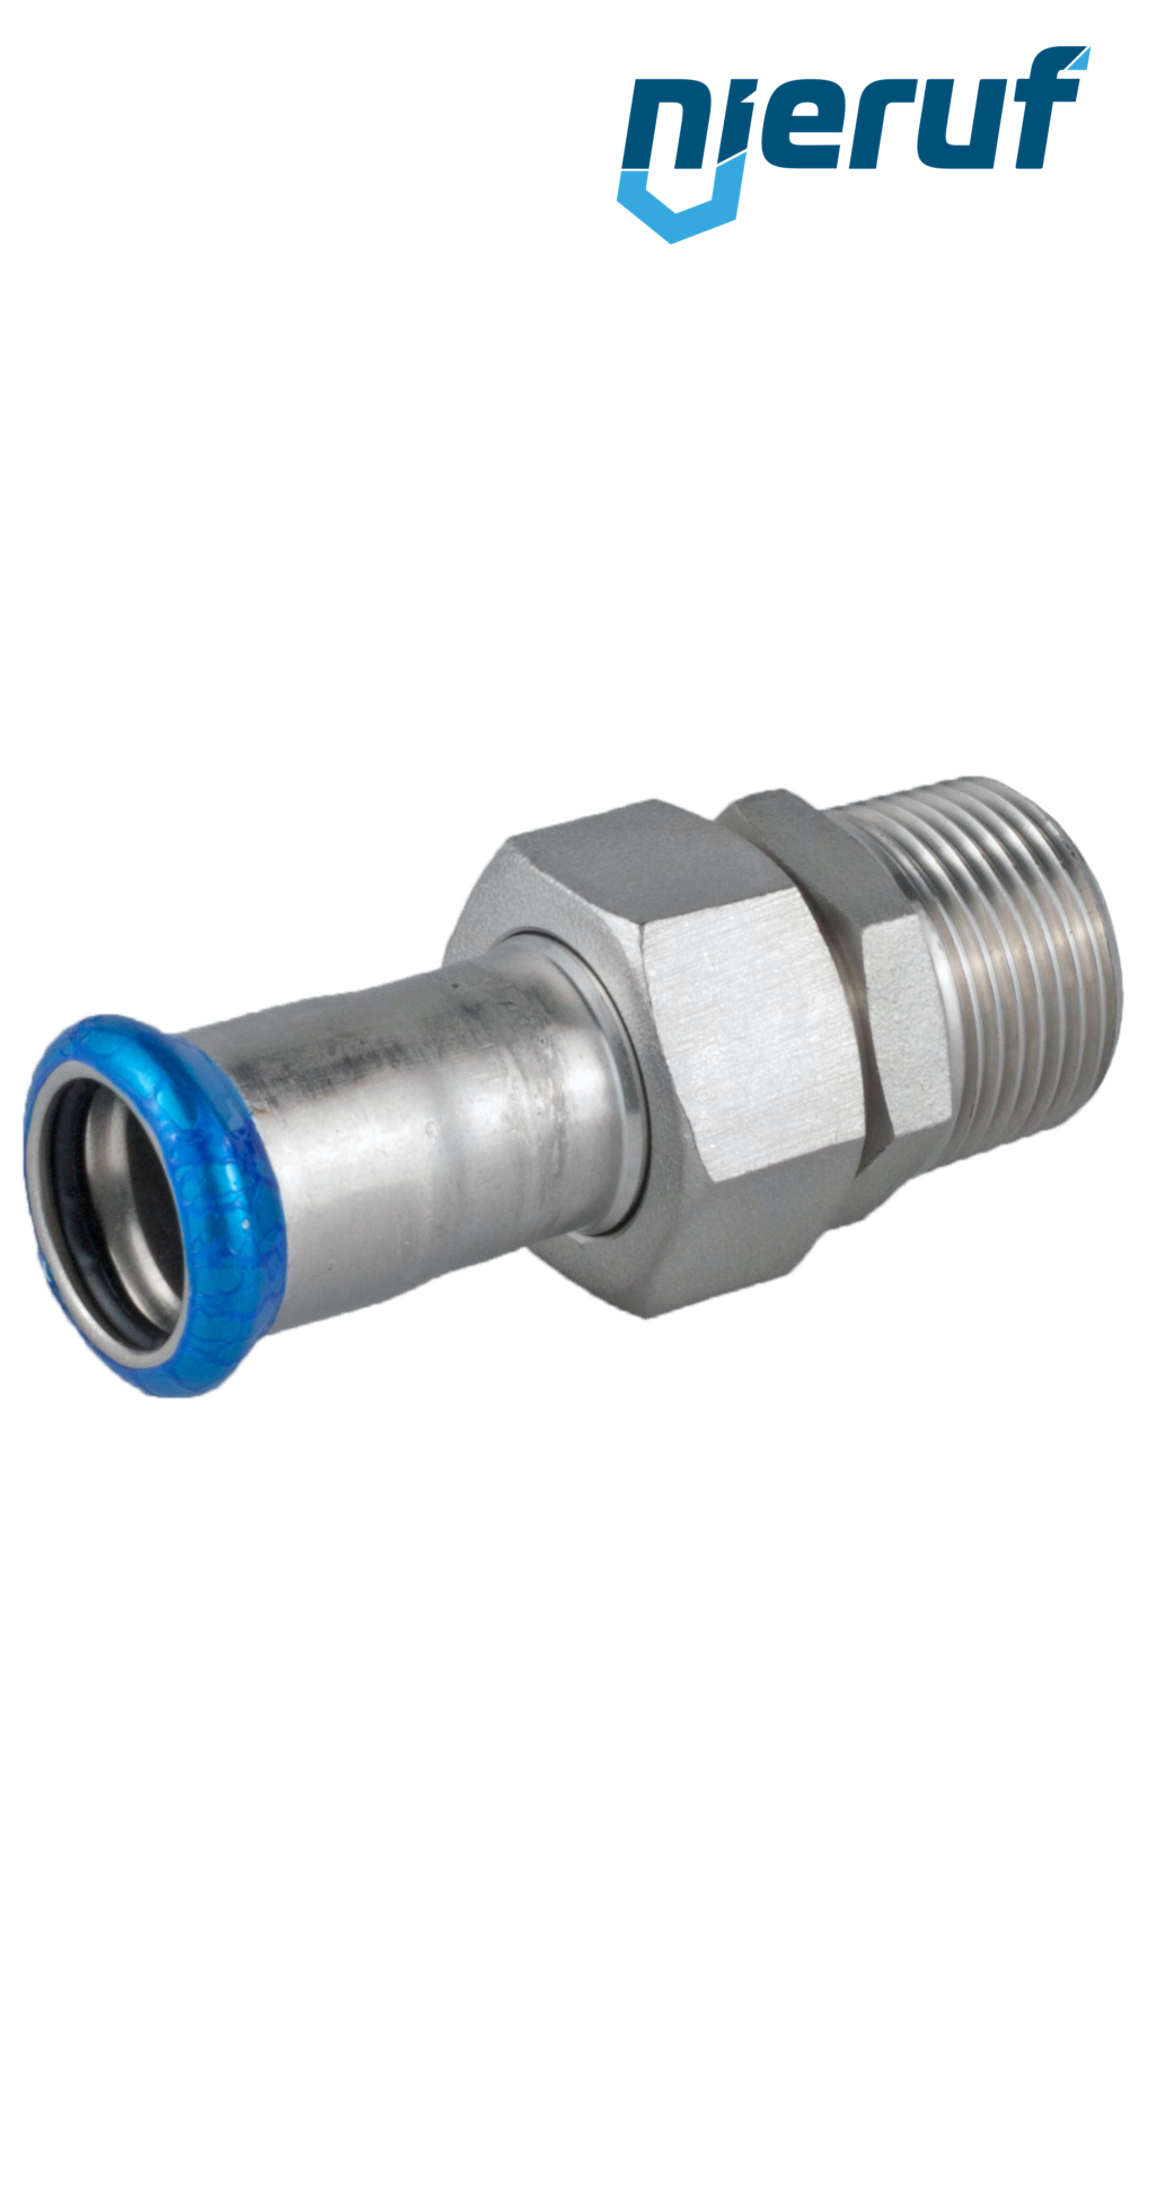 Union Coupling Pressfitting F DN15 - 18,0 mm male thread 1/2" inch stainless steel